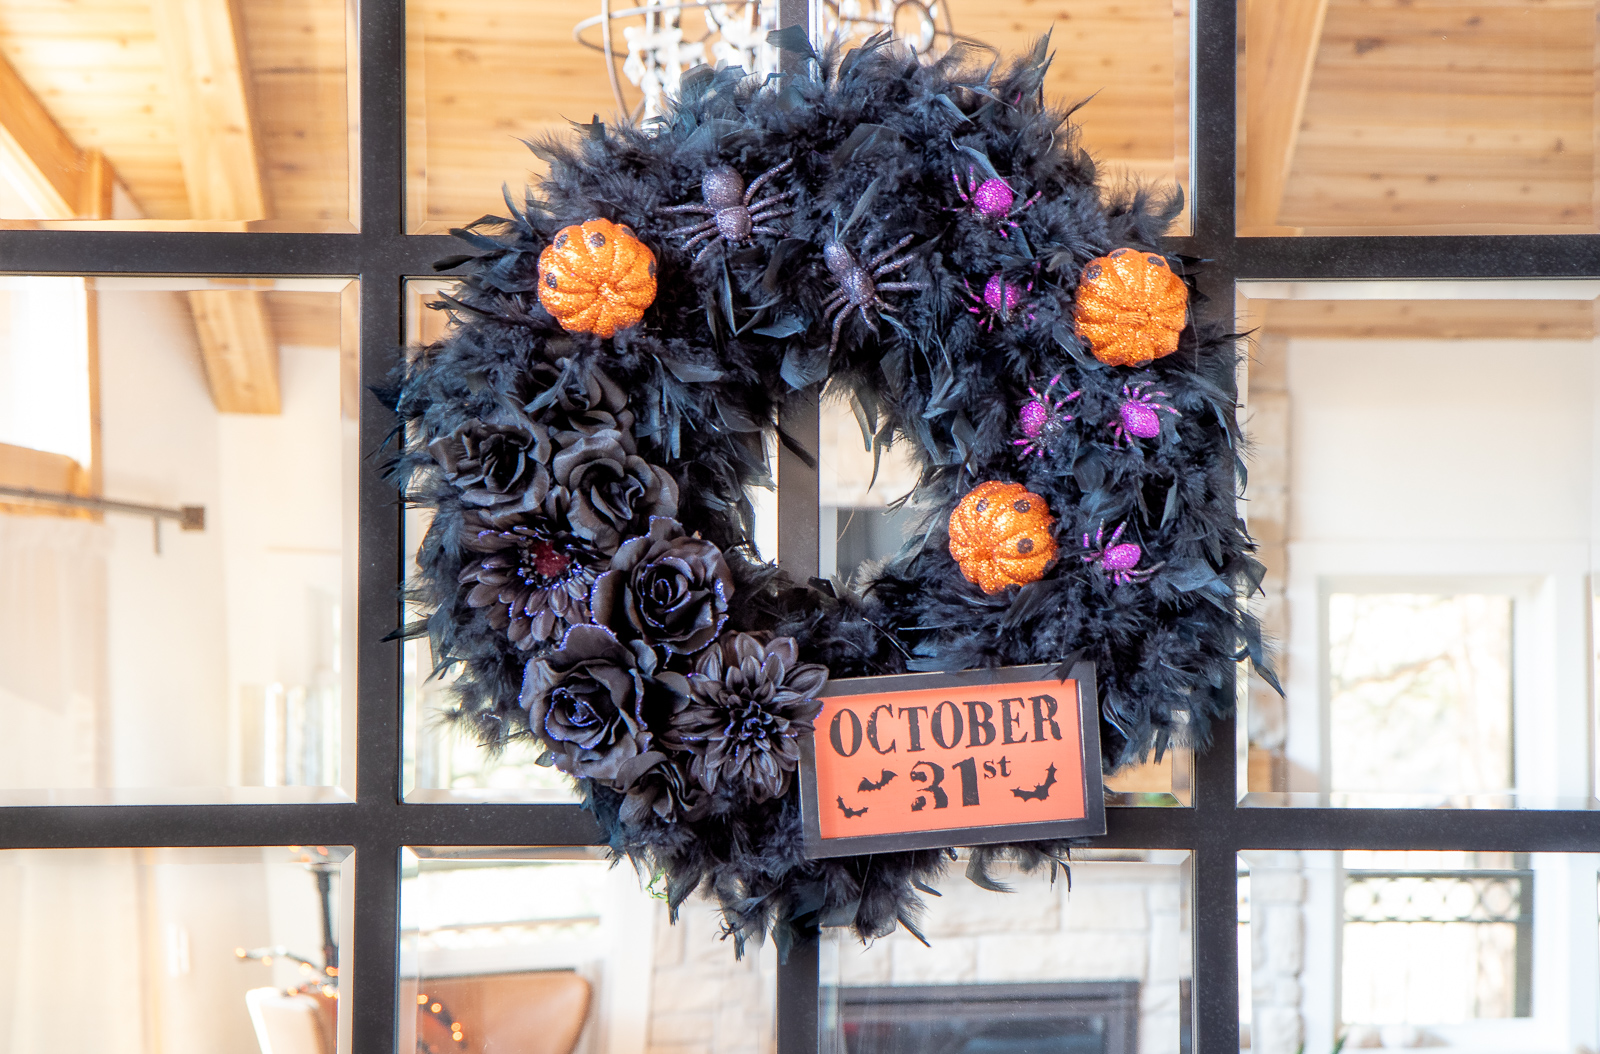 DIY Spooky-chic Halloween Wreath in 20 minutes or less